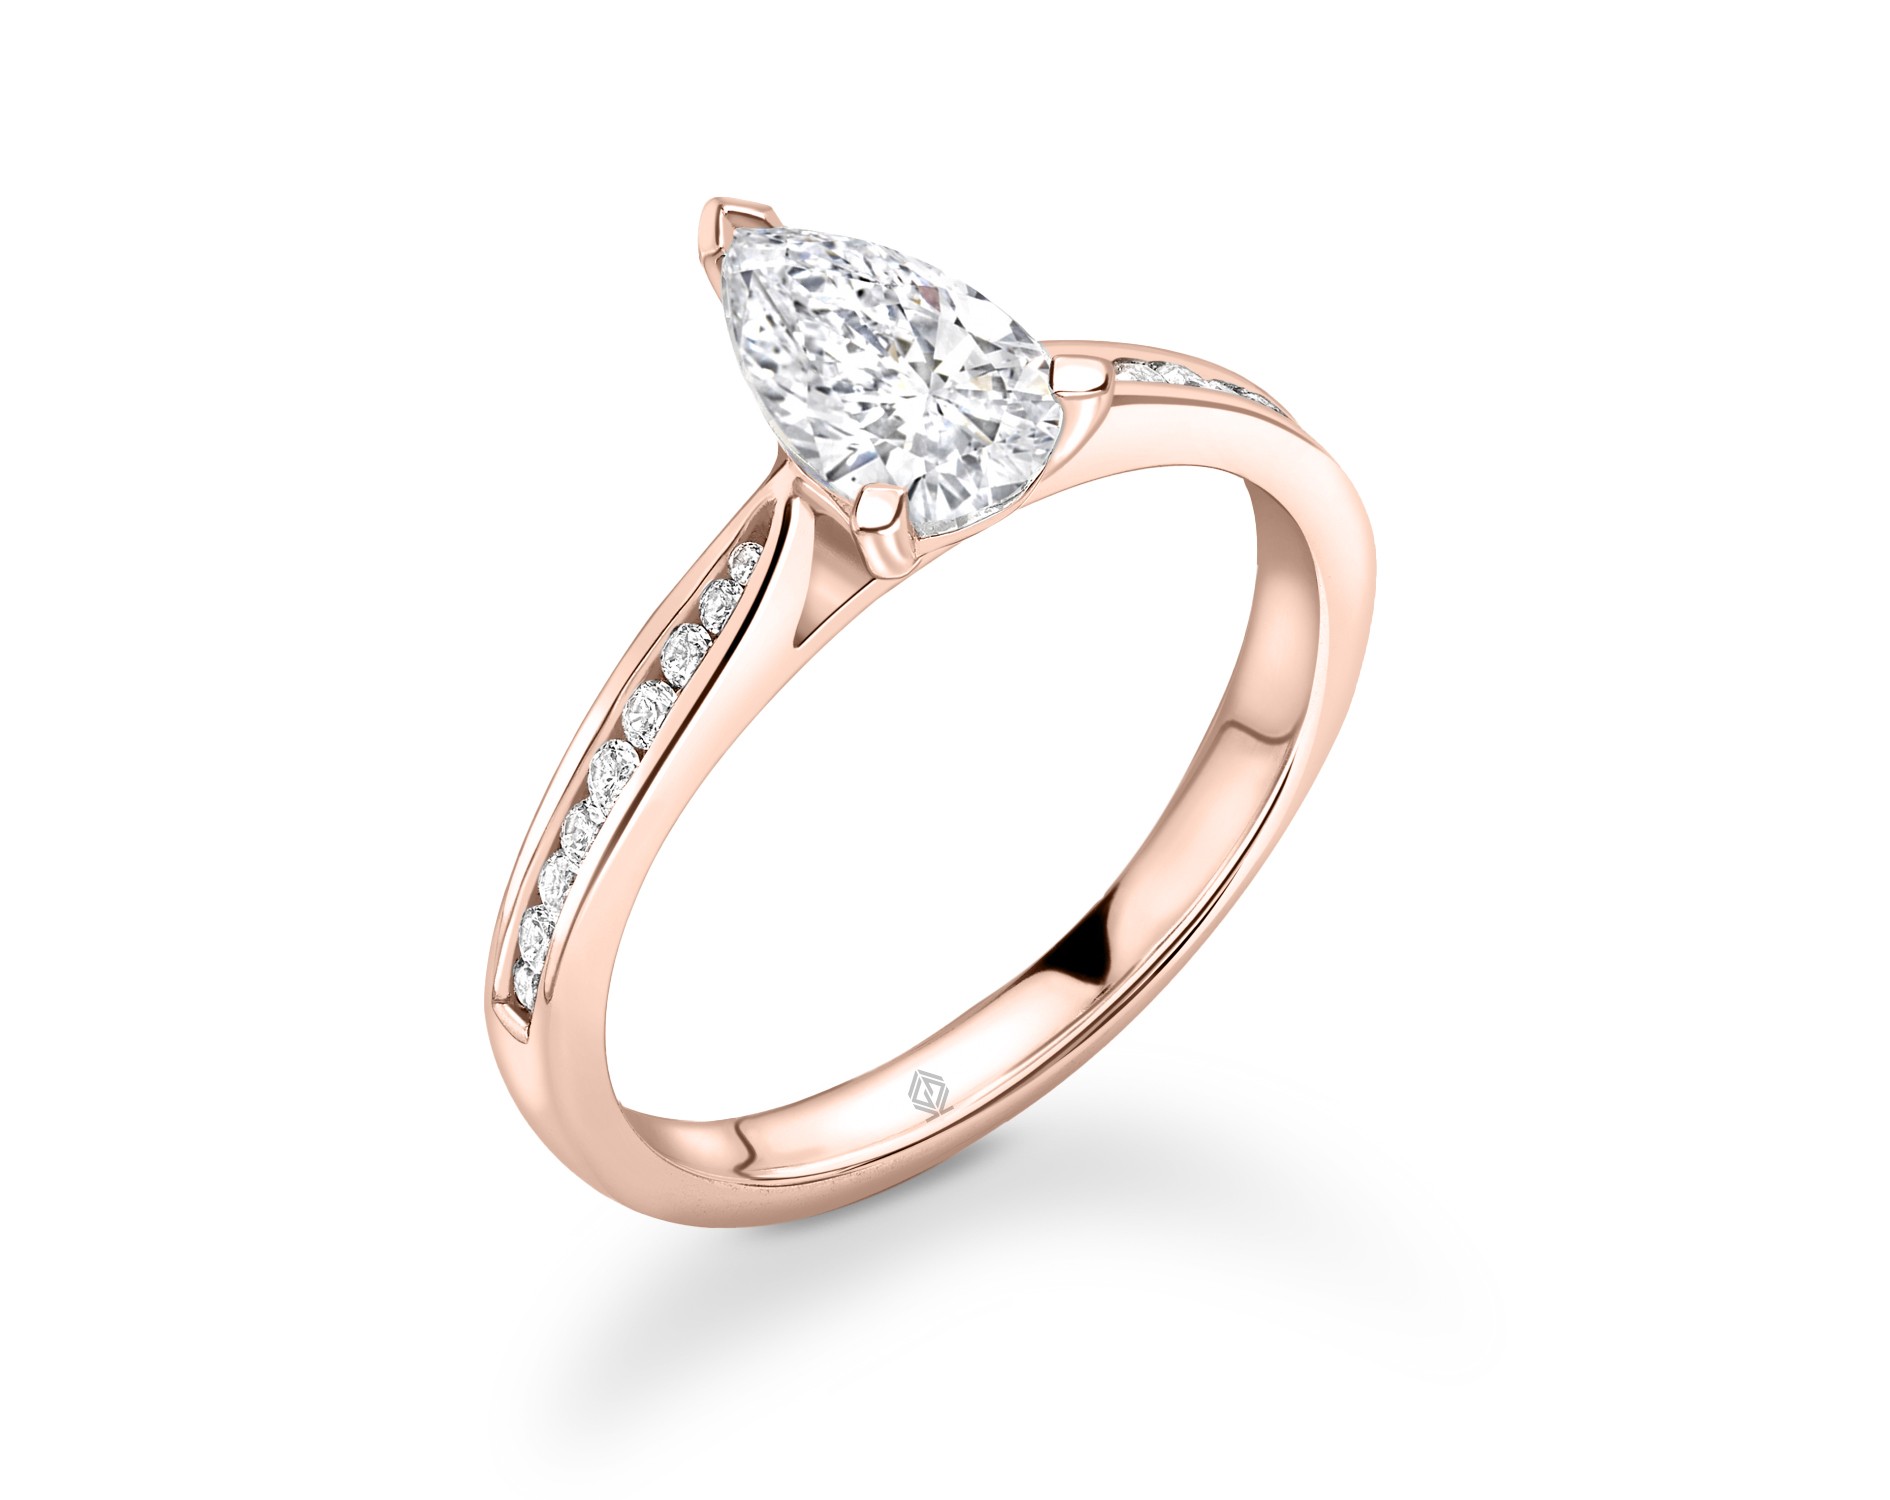 18K ROSE GOLD PEAR CUT DIAMOND ENGAGEMENT RING WITH SIDE STONES CHANNEL SET